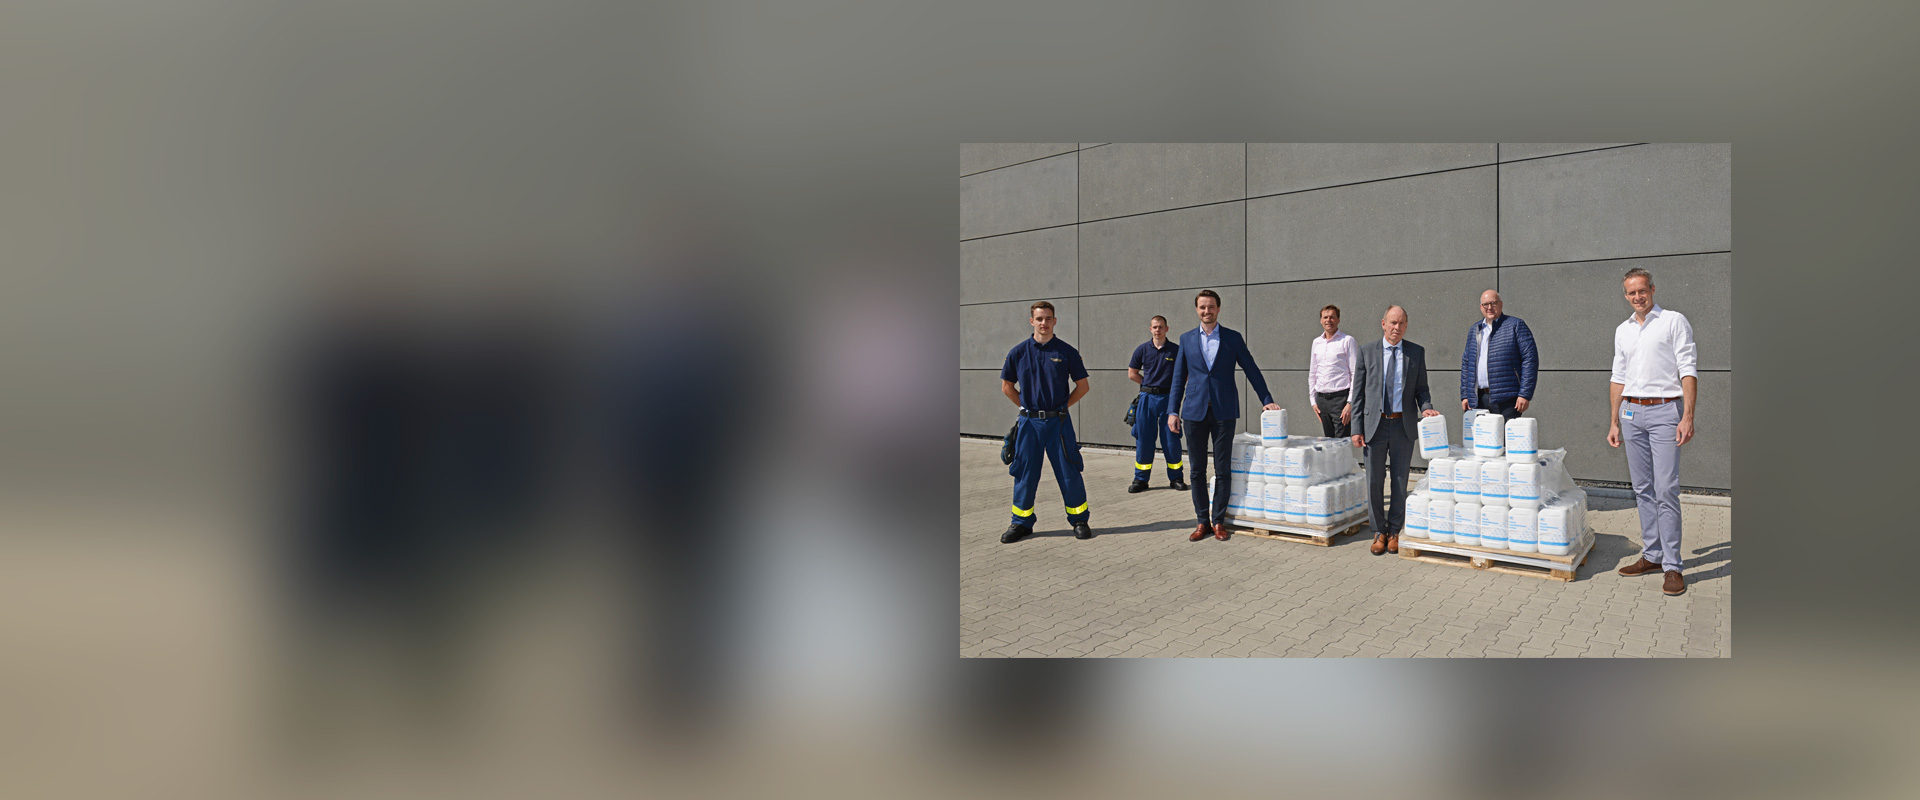 Handover of the 100 five-litre containers of disinfectant from MC-Bauchemie's in-house production to the Mayor of Bot-trop, Bernd Tischler, at the company’s Am Kruppwald site.